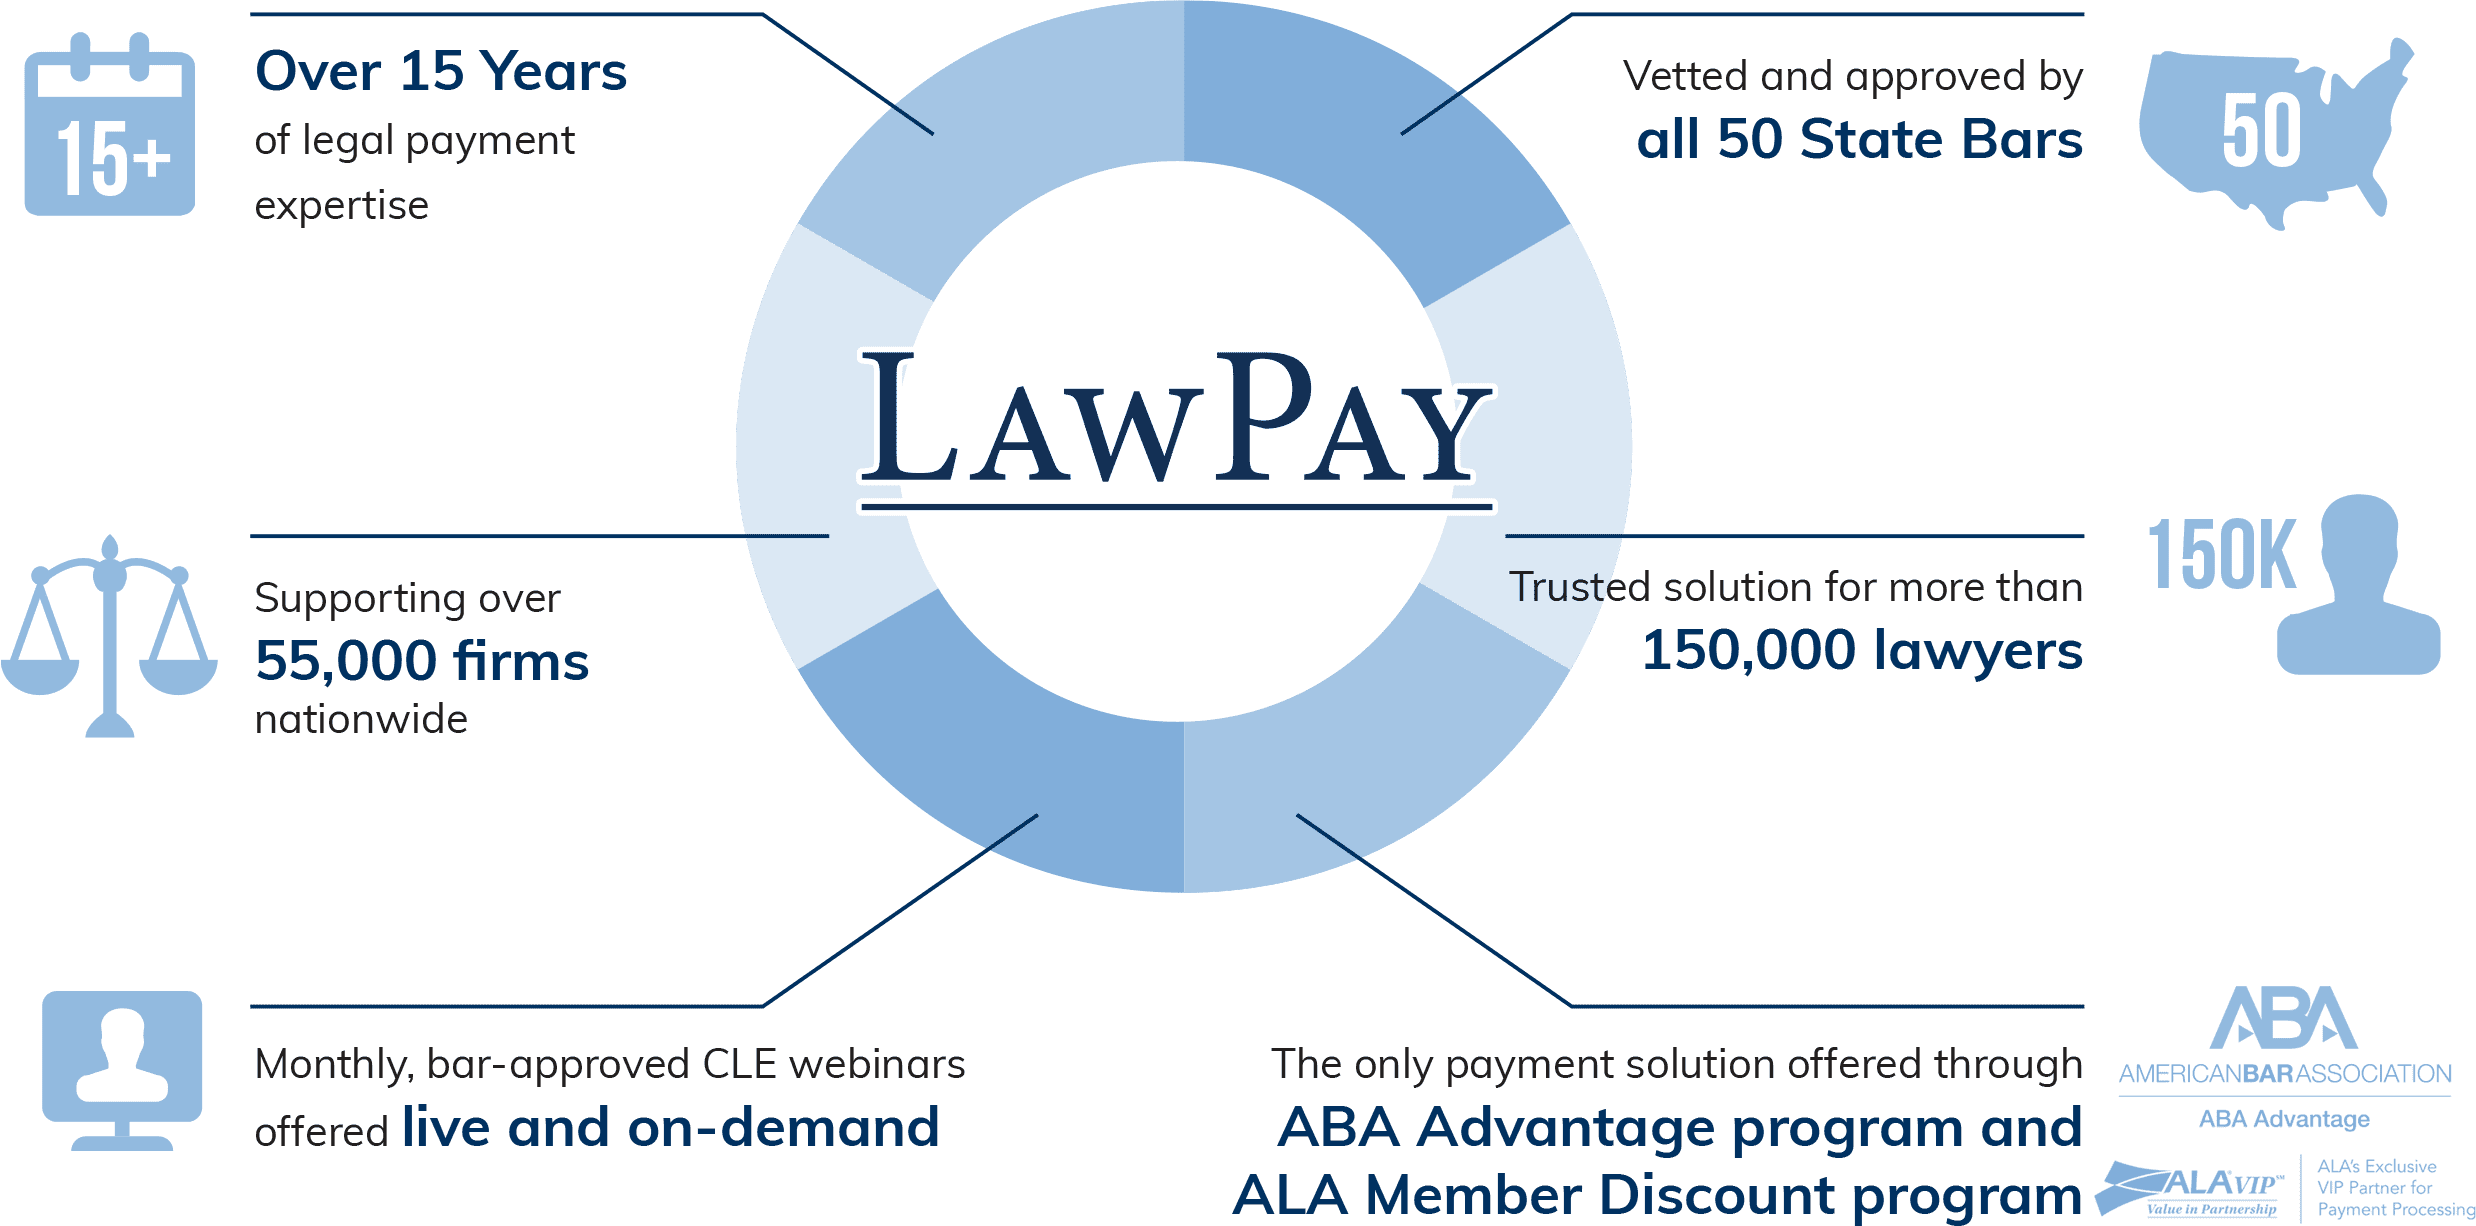 LawPay supports over 55,000 firms and 150,000 lawyers nationwide.
                LawPay offers monthly bar-approved CLE webinars and is the only payment 
                solution offered through the ABA Advantage program and ALA Member Discount 
                program